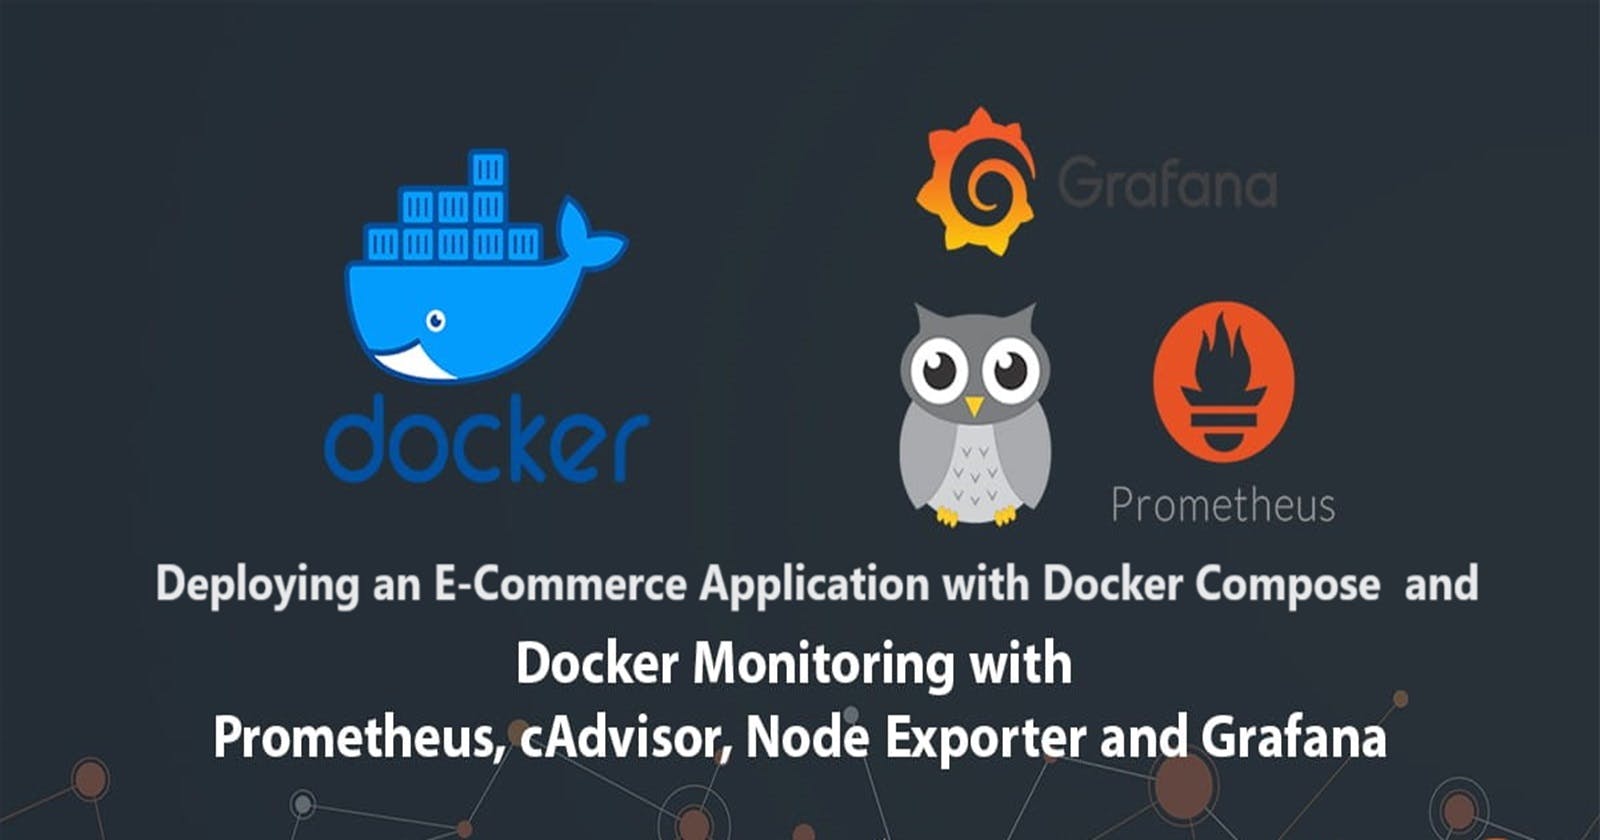 🚀 Deploying an E-Commerce Application with Docker Compose and Advanced Monitoring with Prometheus, Grafana, and cAdvisor 🔍